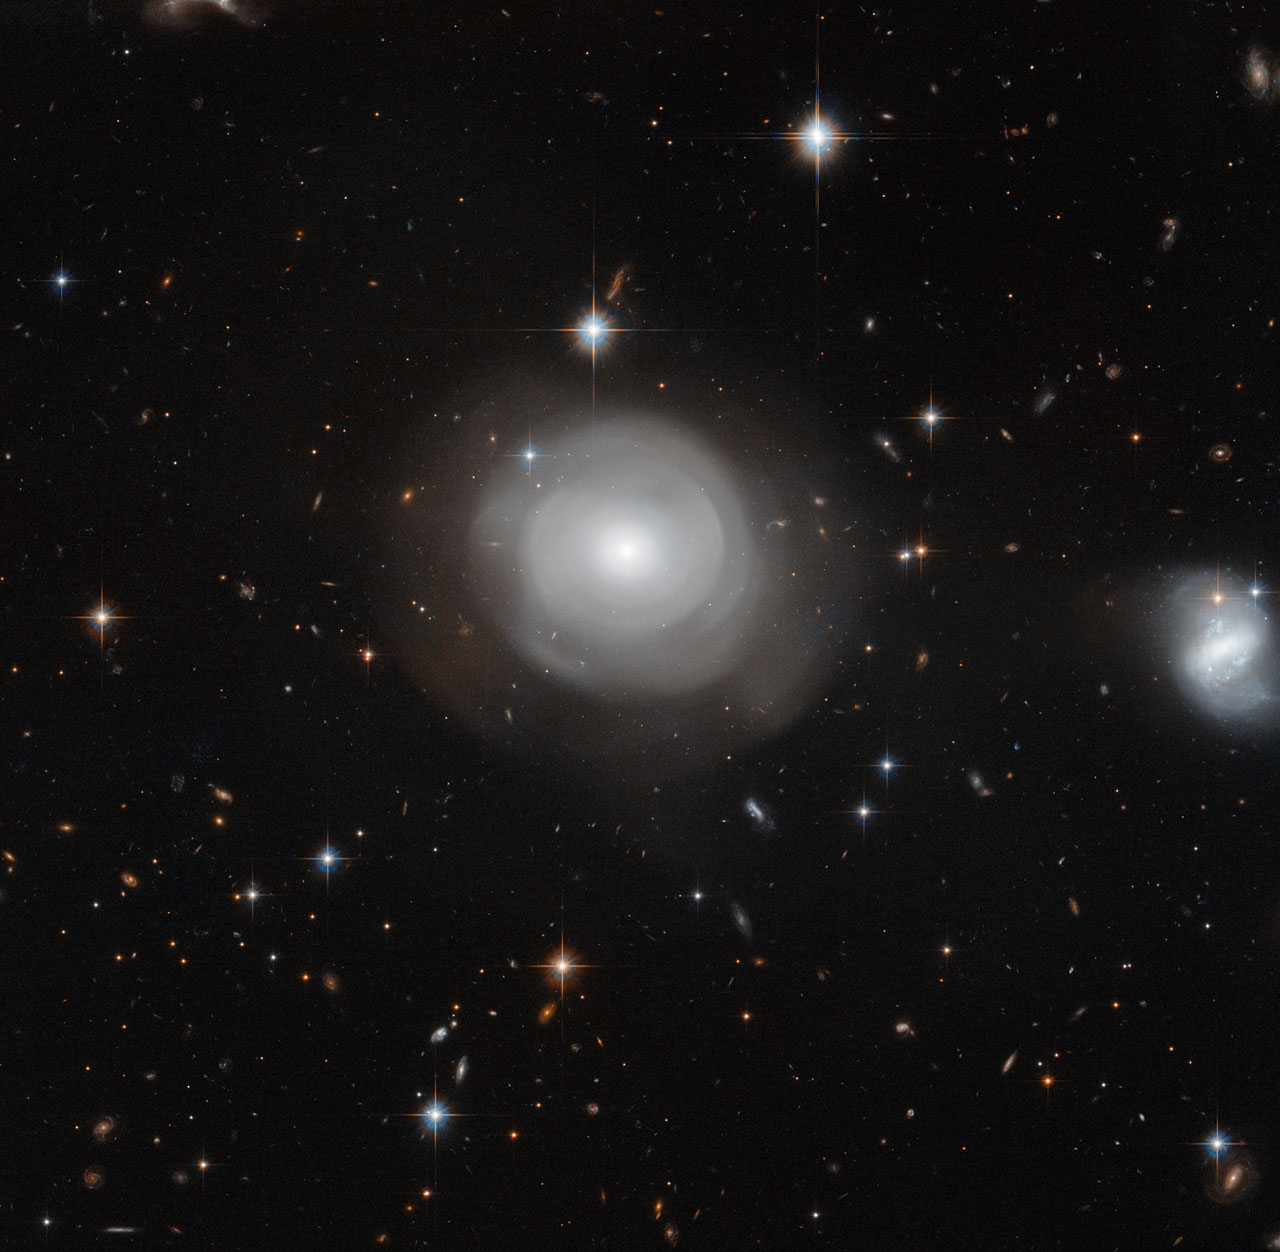 Hubble image of ESO 381-12